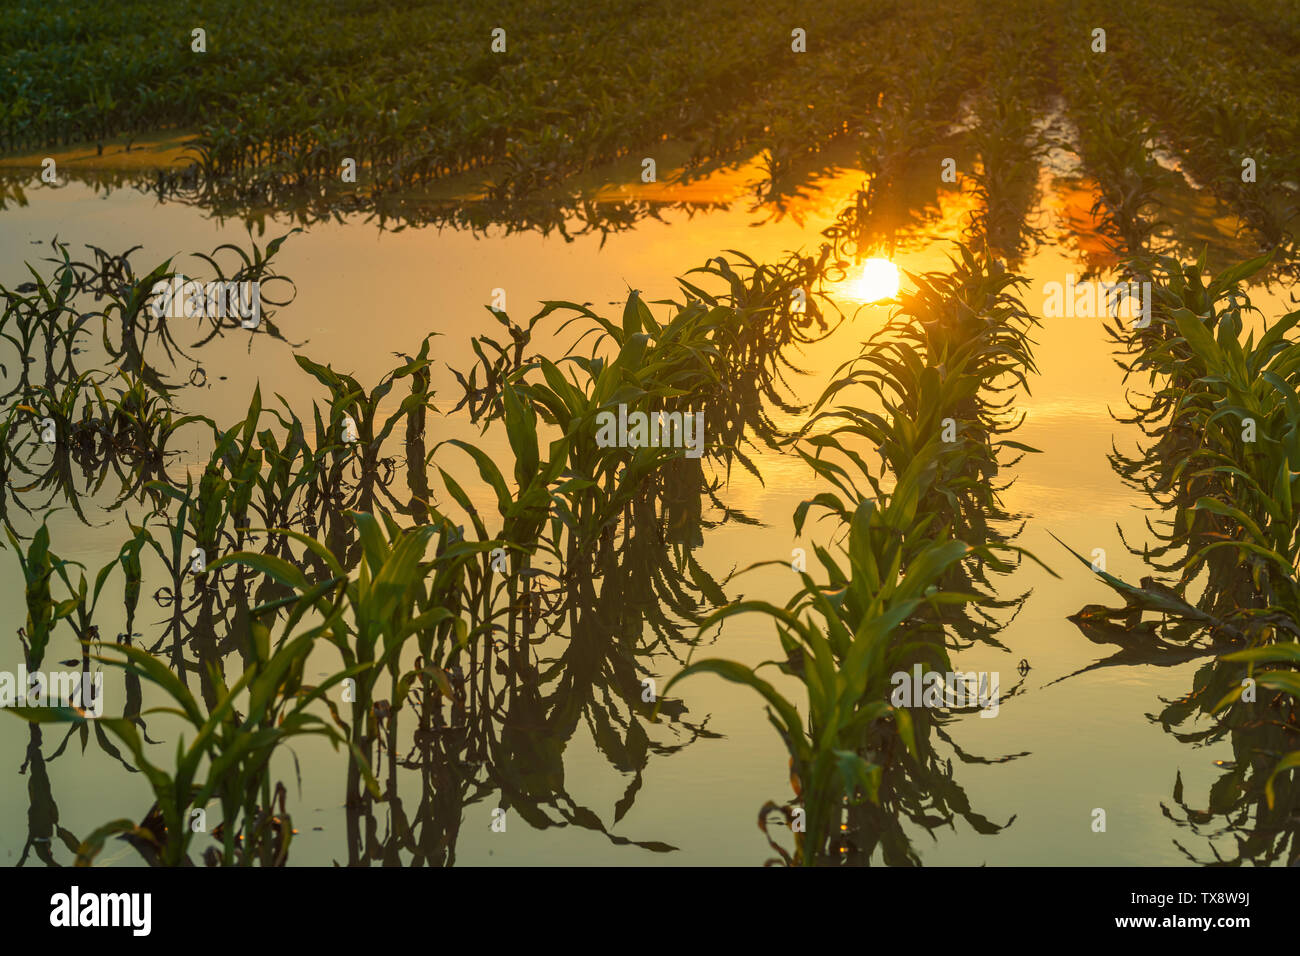 Flooded young corn field plantation with damaged crops in sunset after severe rainy season that will impact the yield of cultivated plant Stock Photo